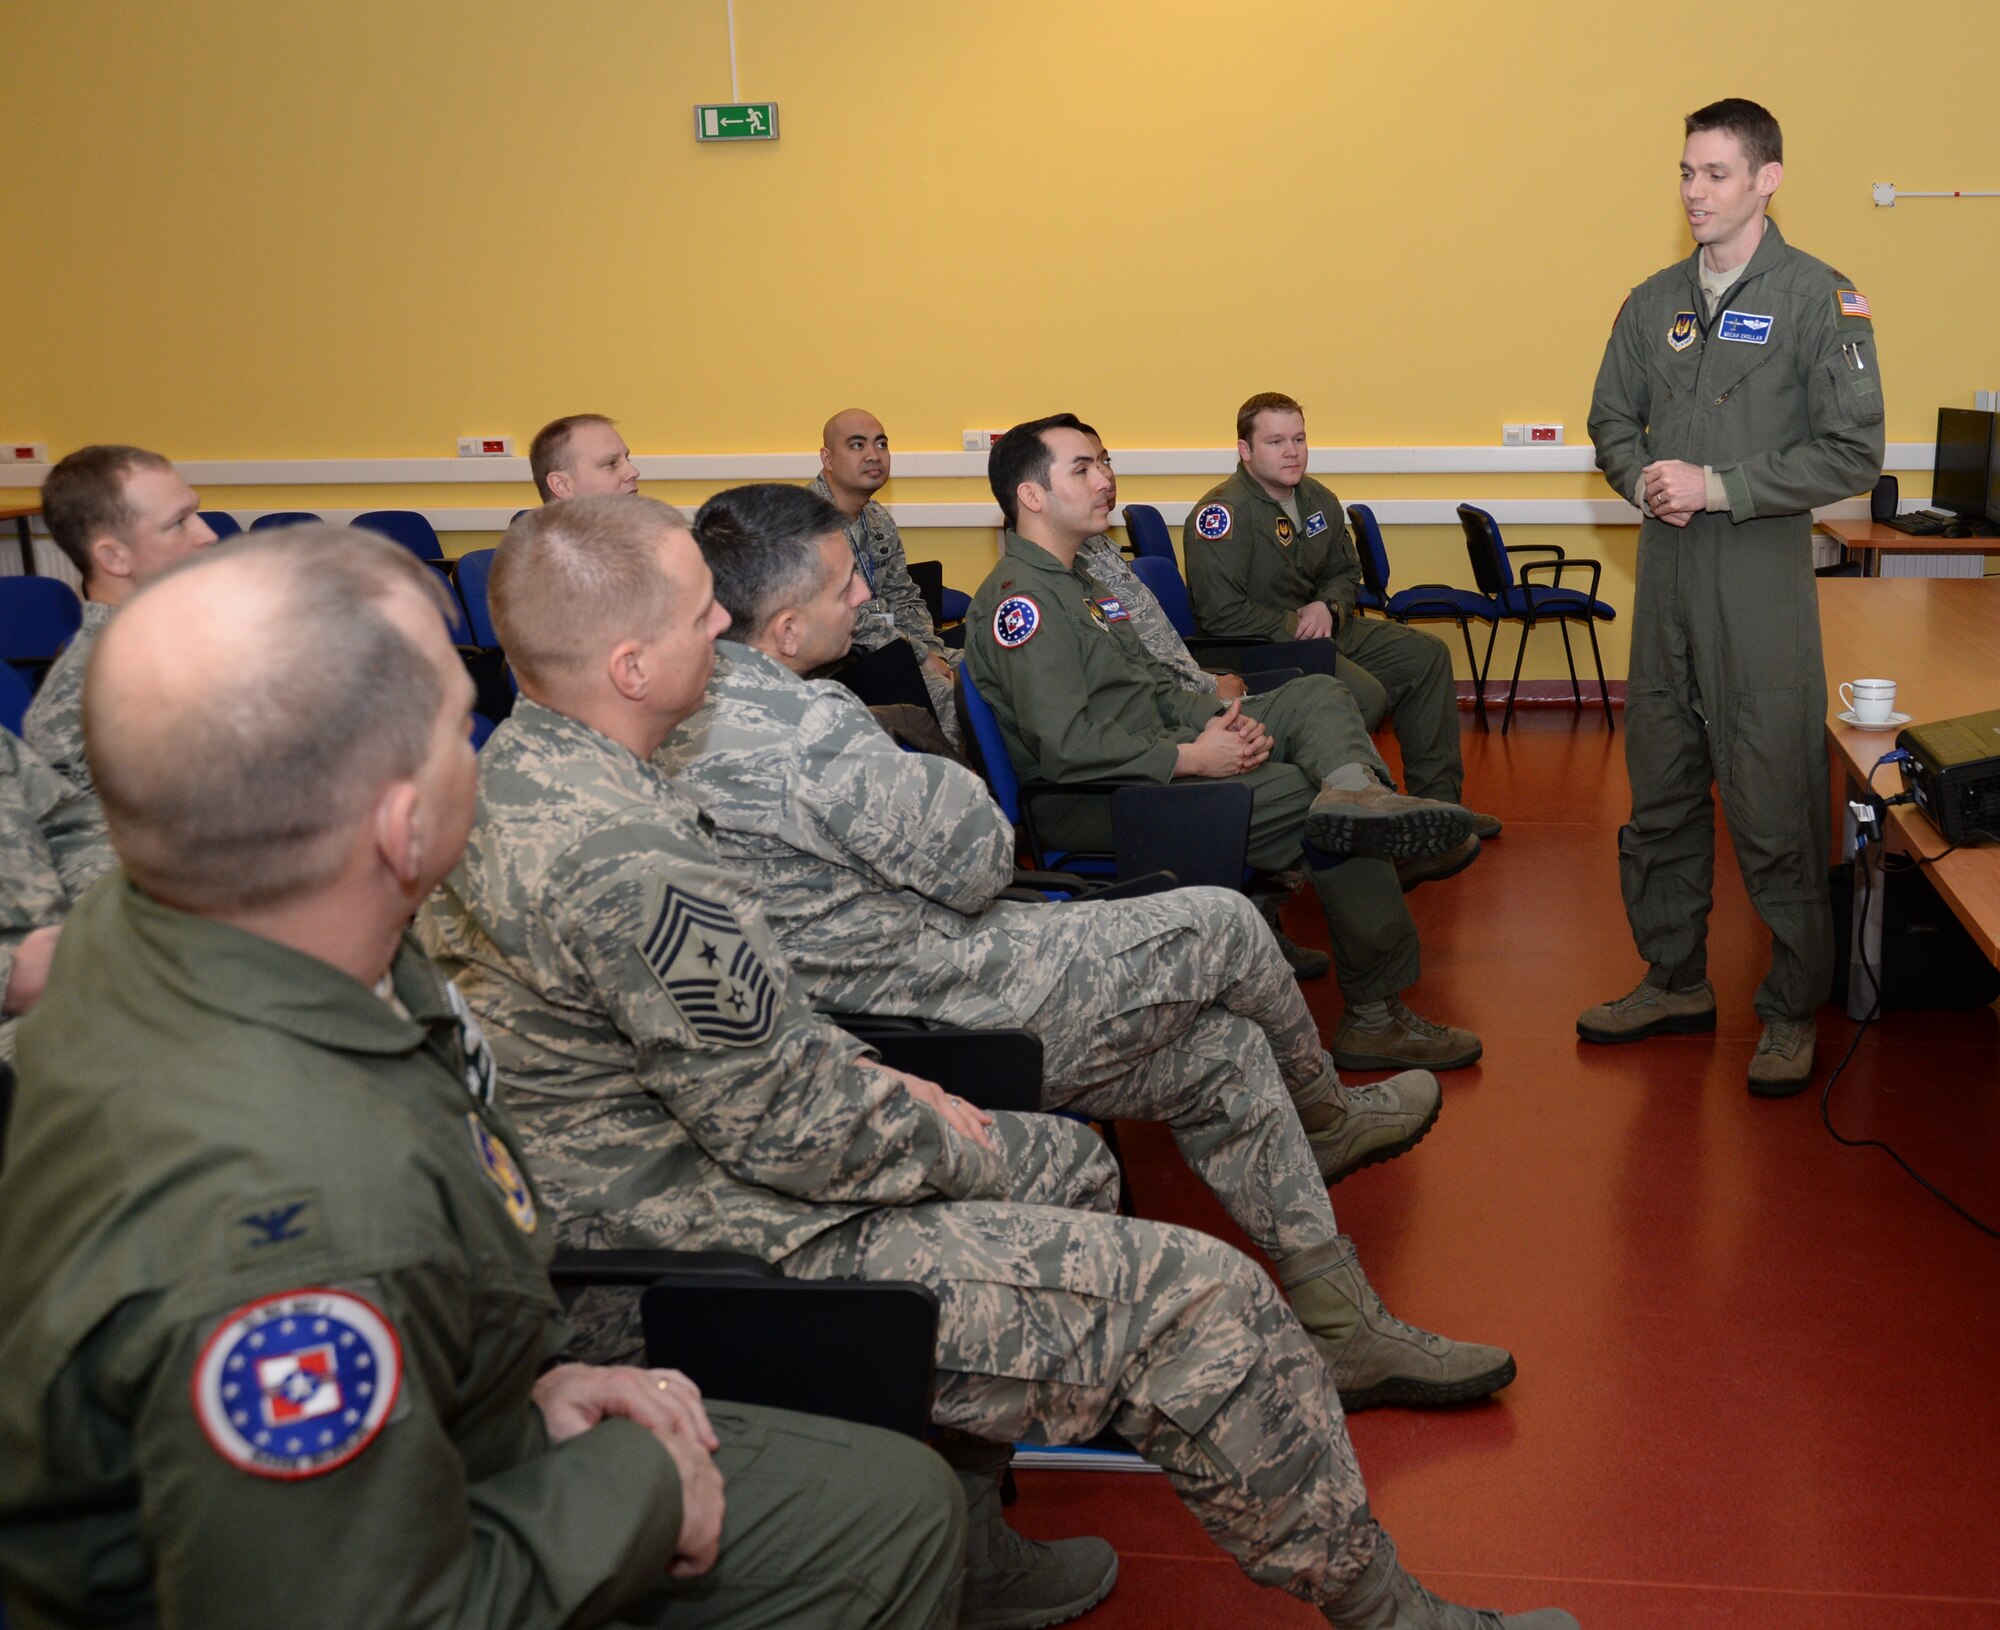 U.S. Air Force Maj. Micah Chollar, director of operations for Detachment 1, 52nd Operations Group, standing, briefs Col. David Julazadeh, 52nd Fighter Wing commander, and Chief Master Sgt. Matthew Grengs, 52nd FW command chief, during a tour of the detachment at Lask Air Base, Poland, Jan. 29, 2014. Ten Airmen assigned to the detachment augment the 52nd OG's facilitation of bilaterial and multinational joint theater security cooperation events. (U.S. Air Force photo by Staff Sgt. Joe W. McFadden / Released)